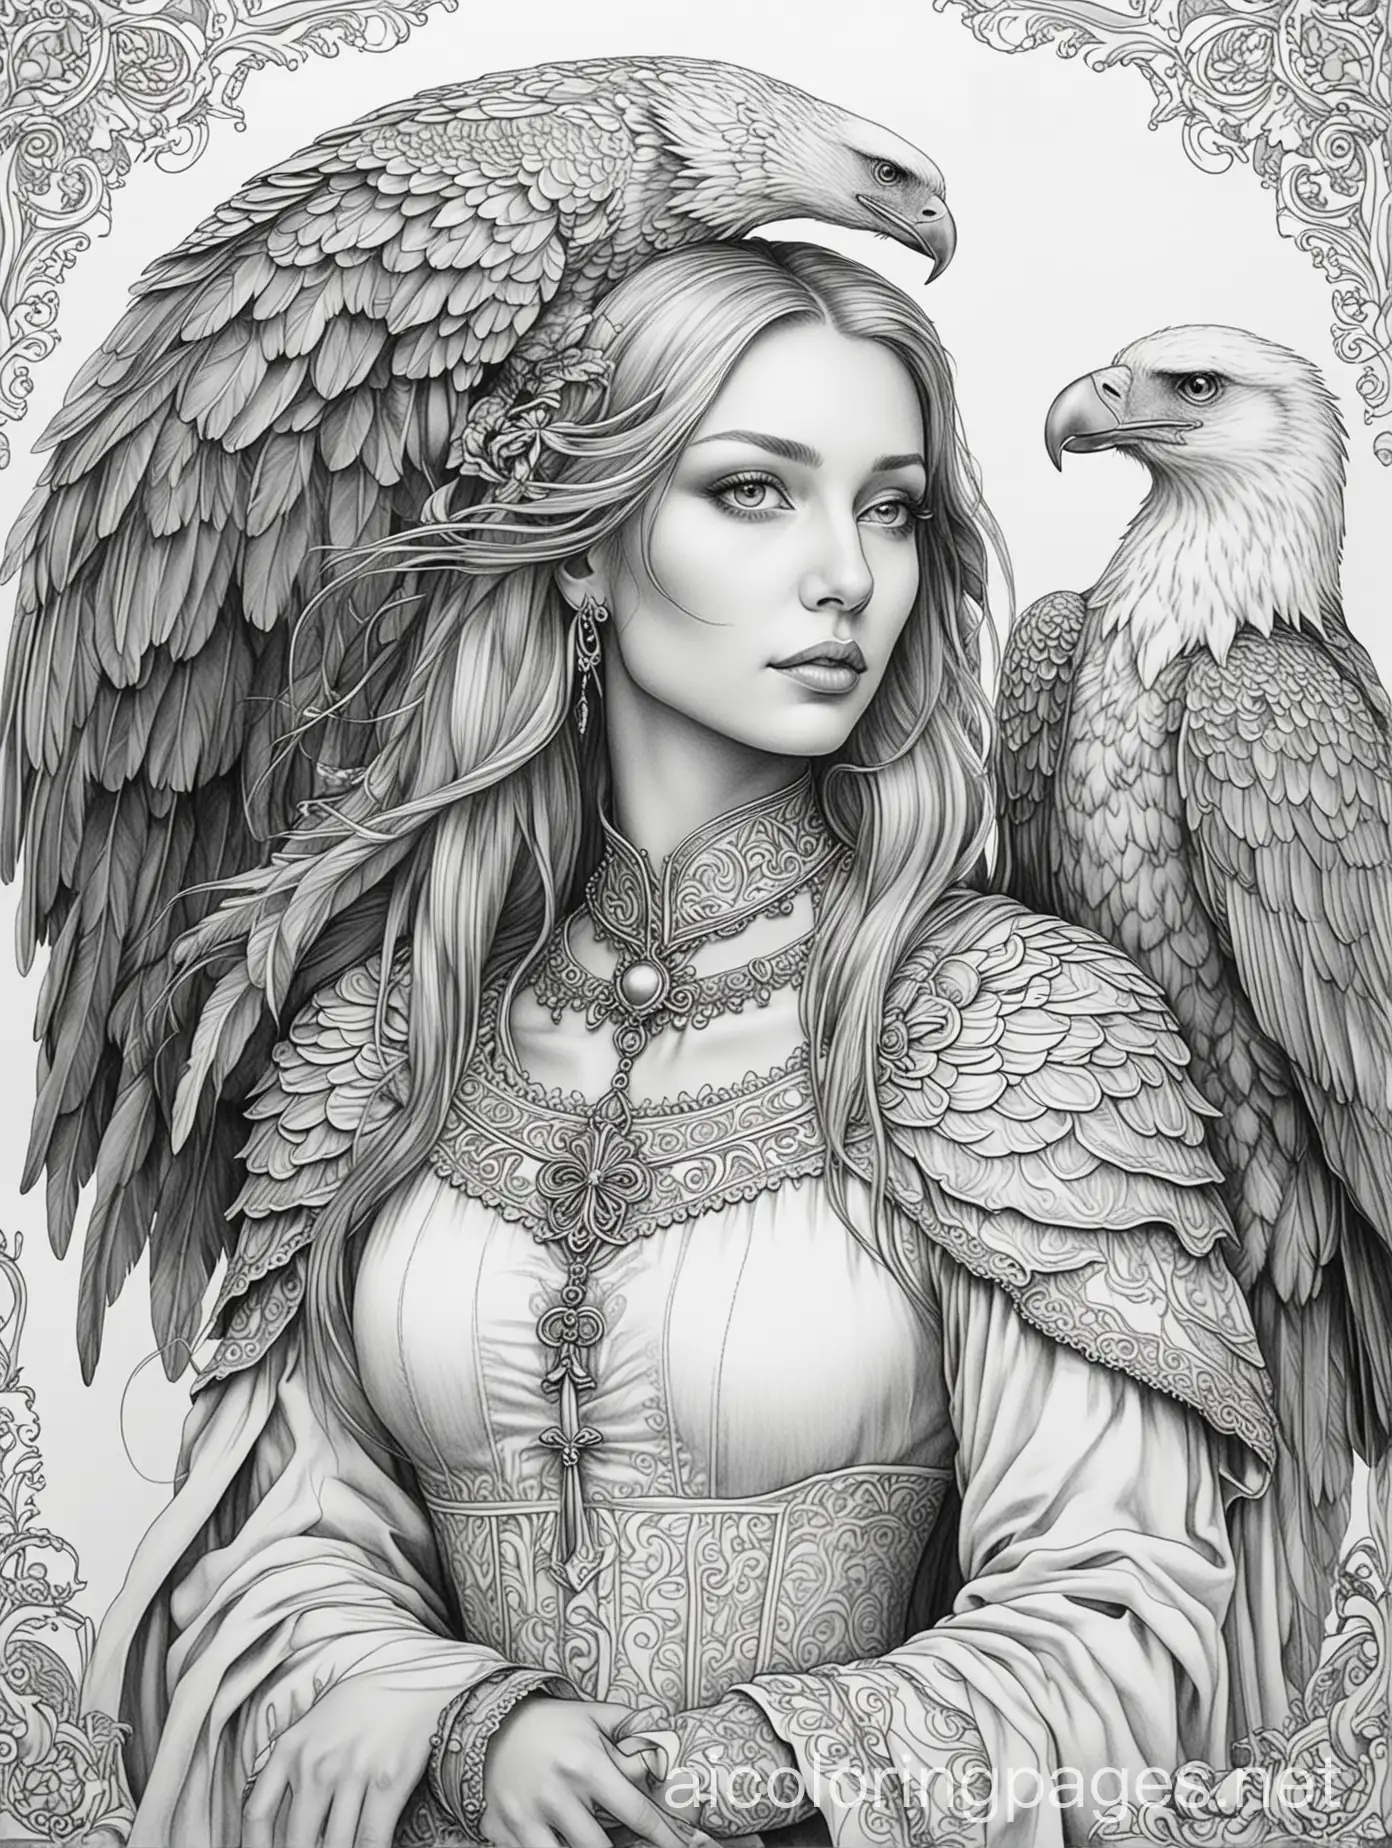 Eagle-and-Gothic-Lady-Adult-Colouring-Page-Intricate-Line-Art-for-Relaxation